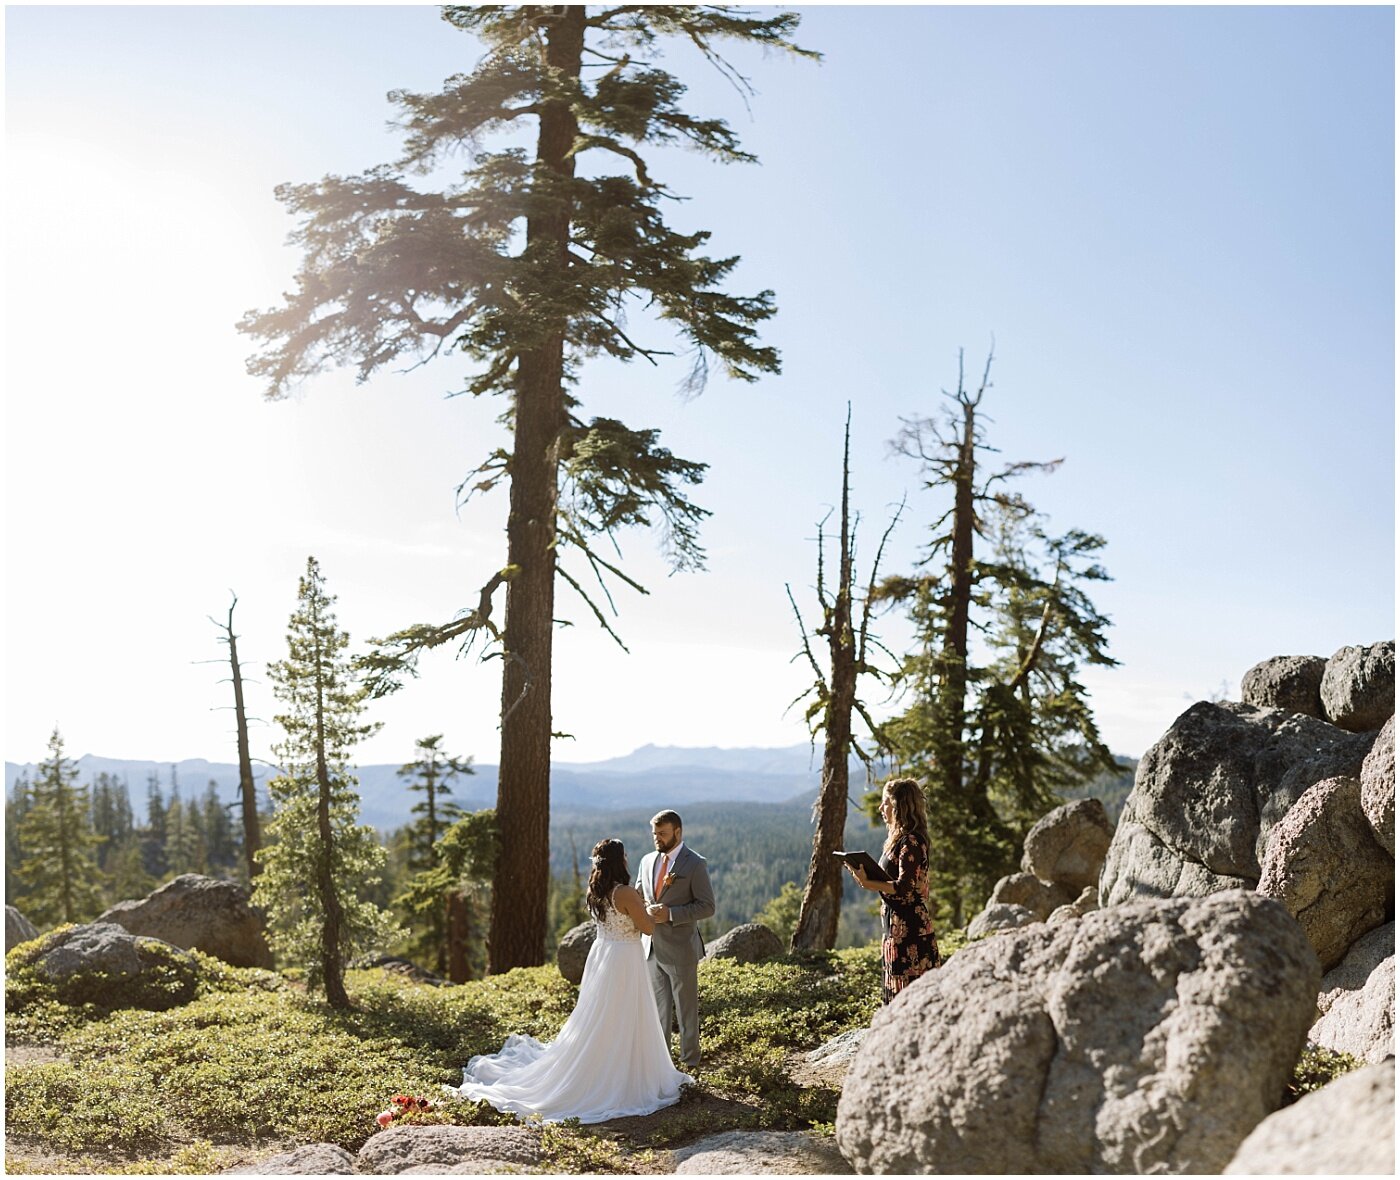 how to create a meaningful ceremony - ruthanne z - lake tahoe elopement photographer_0002.jpg